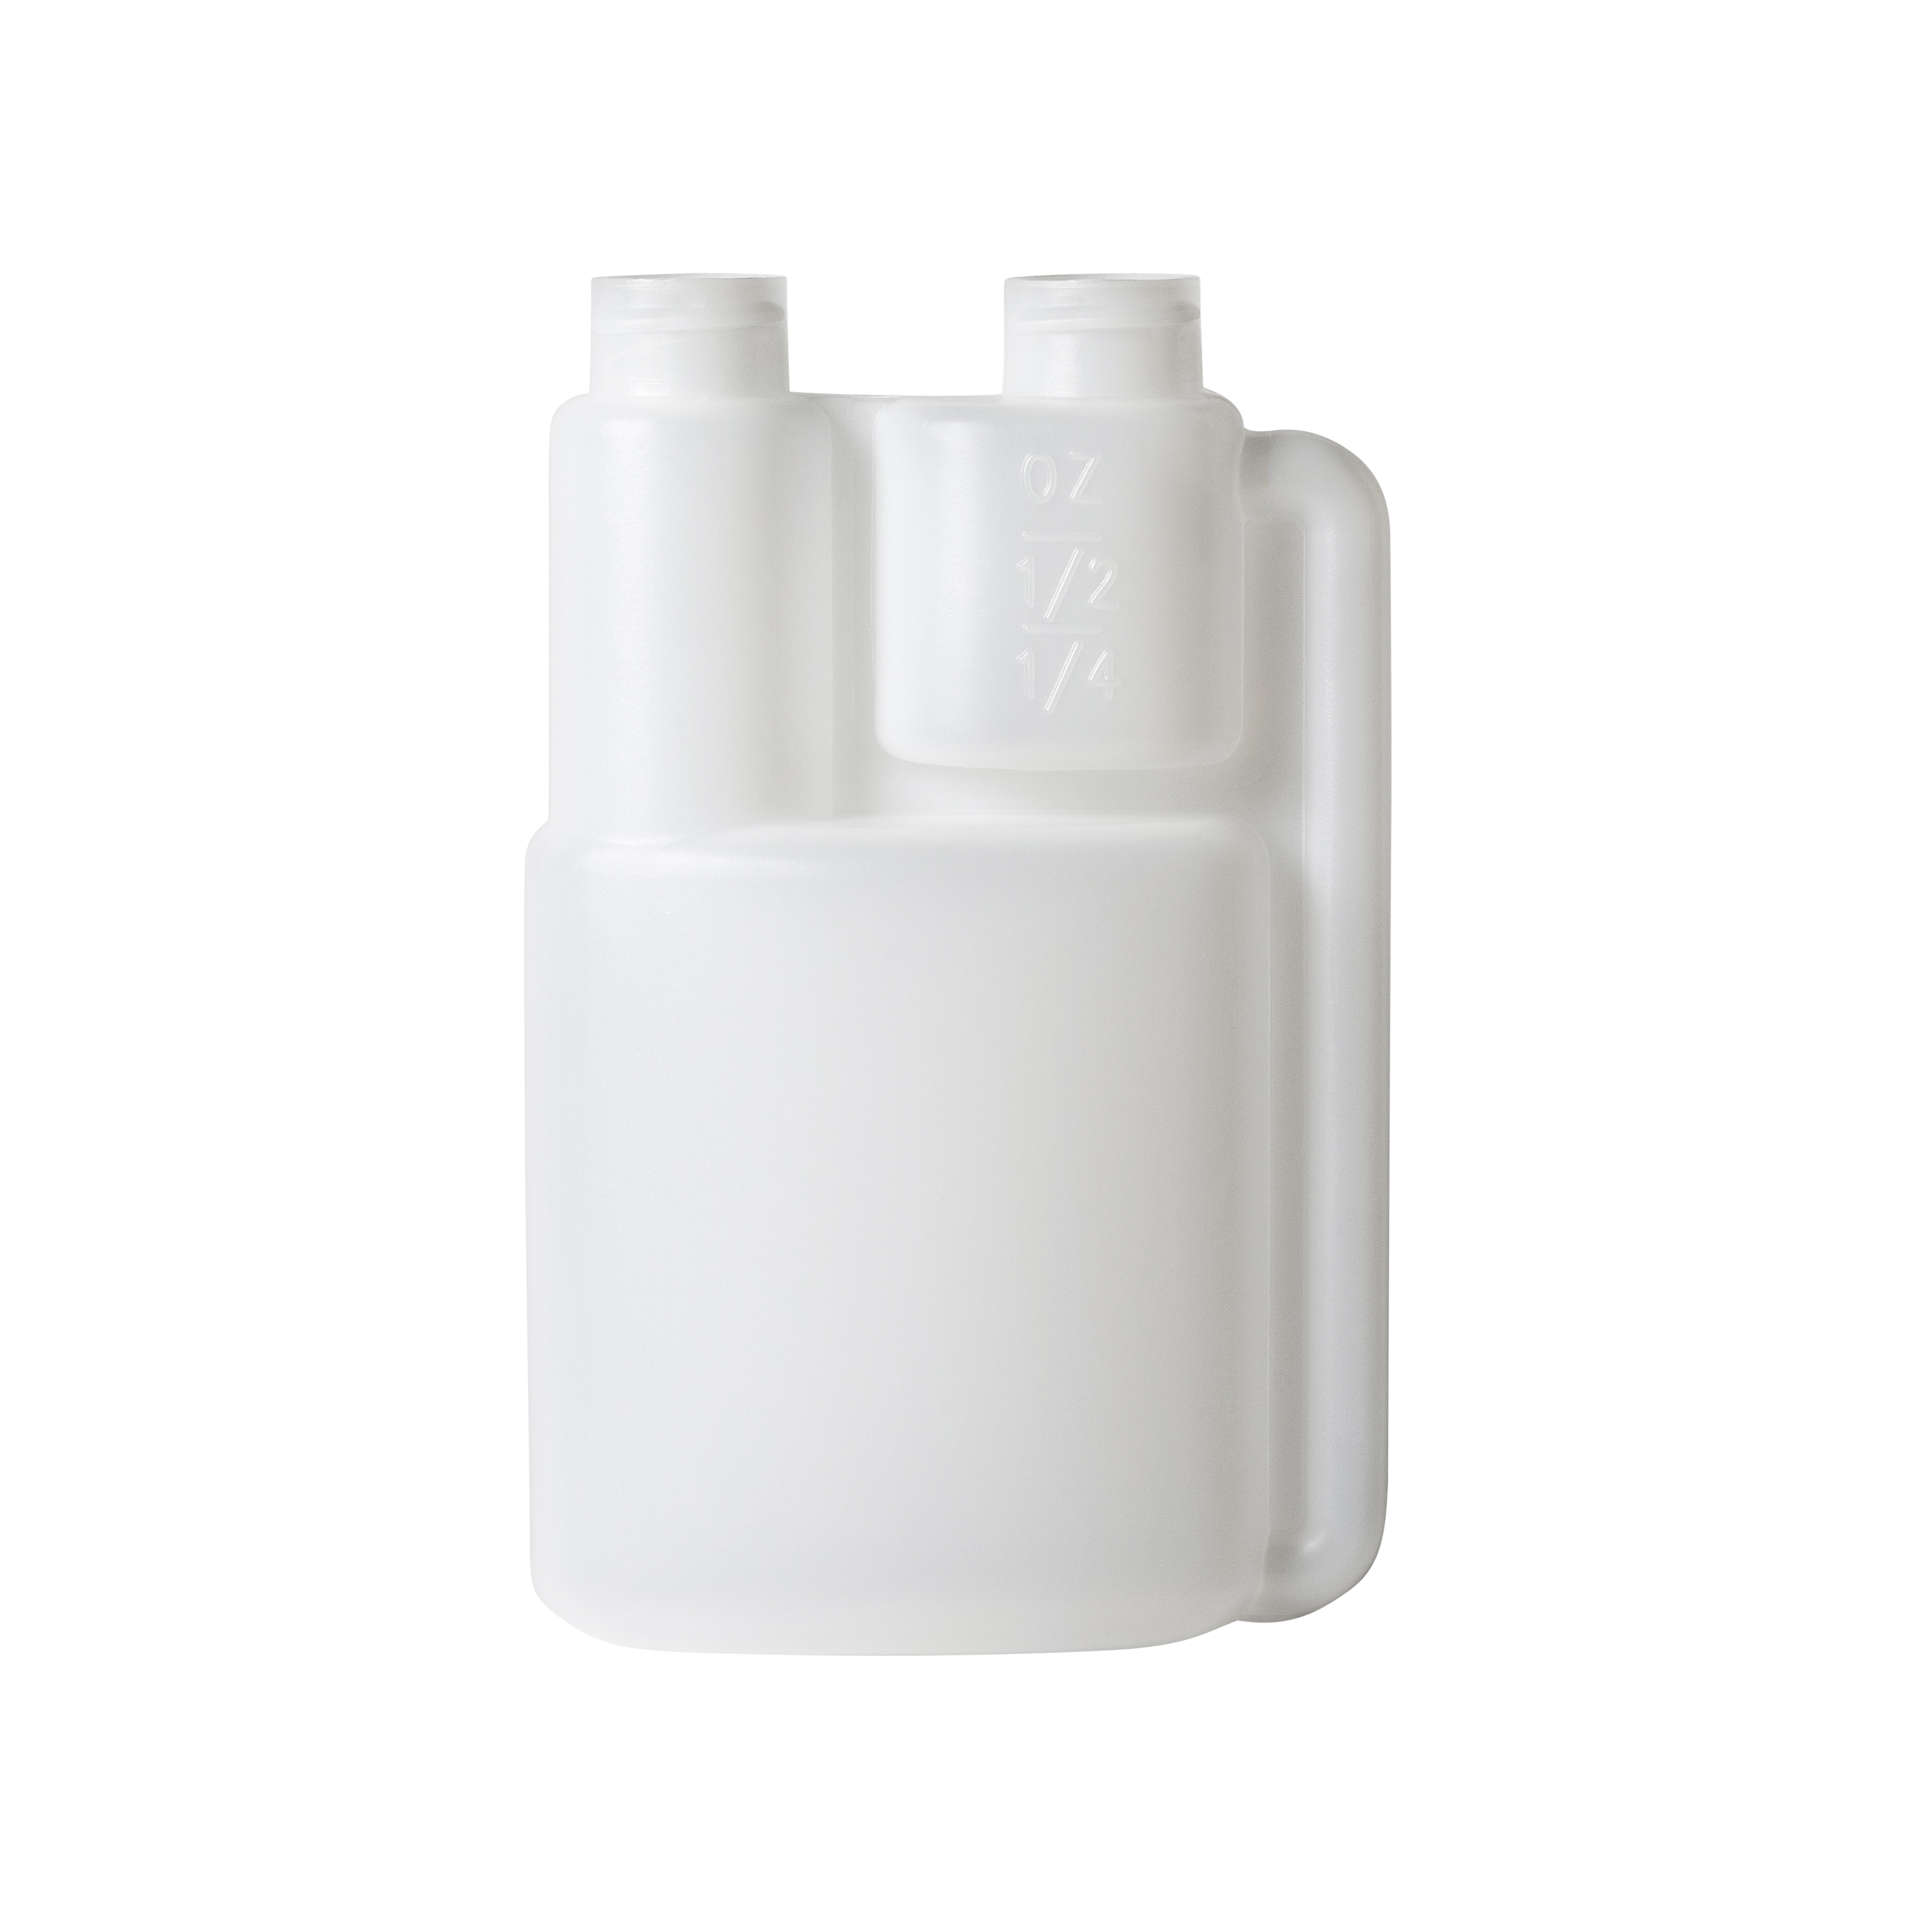 White container on white background